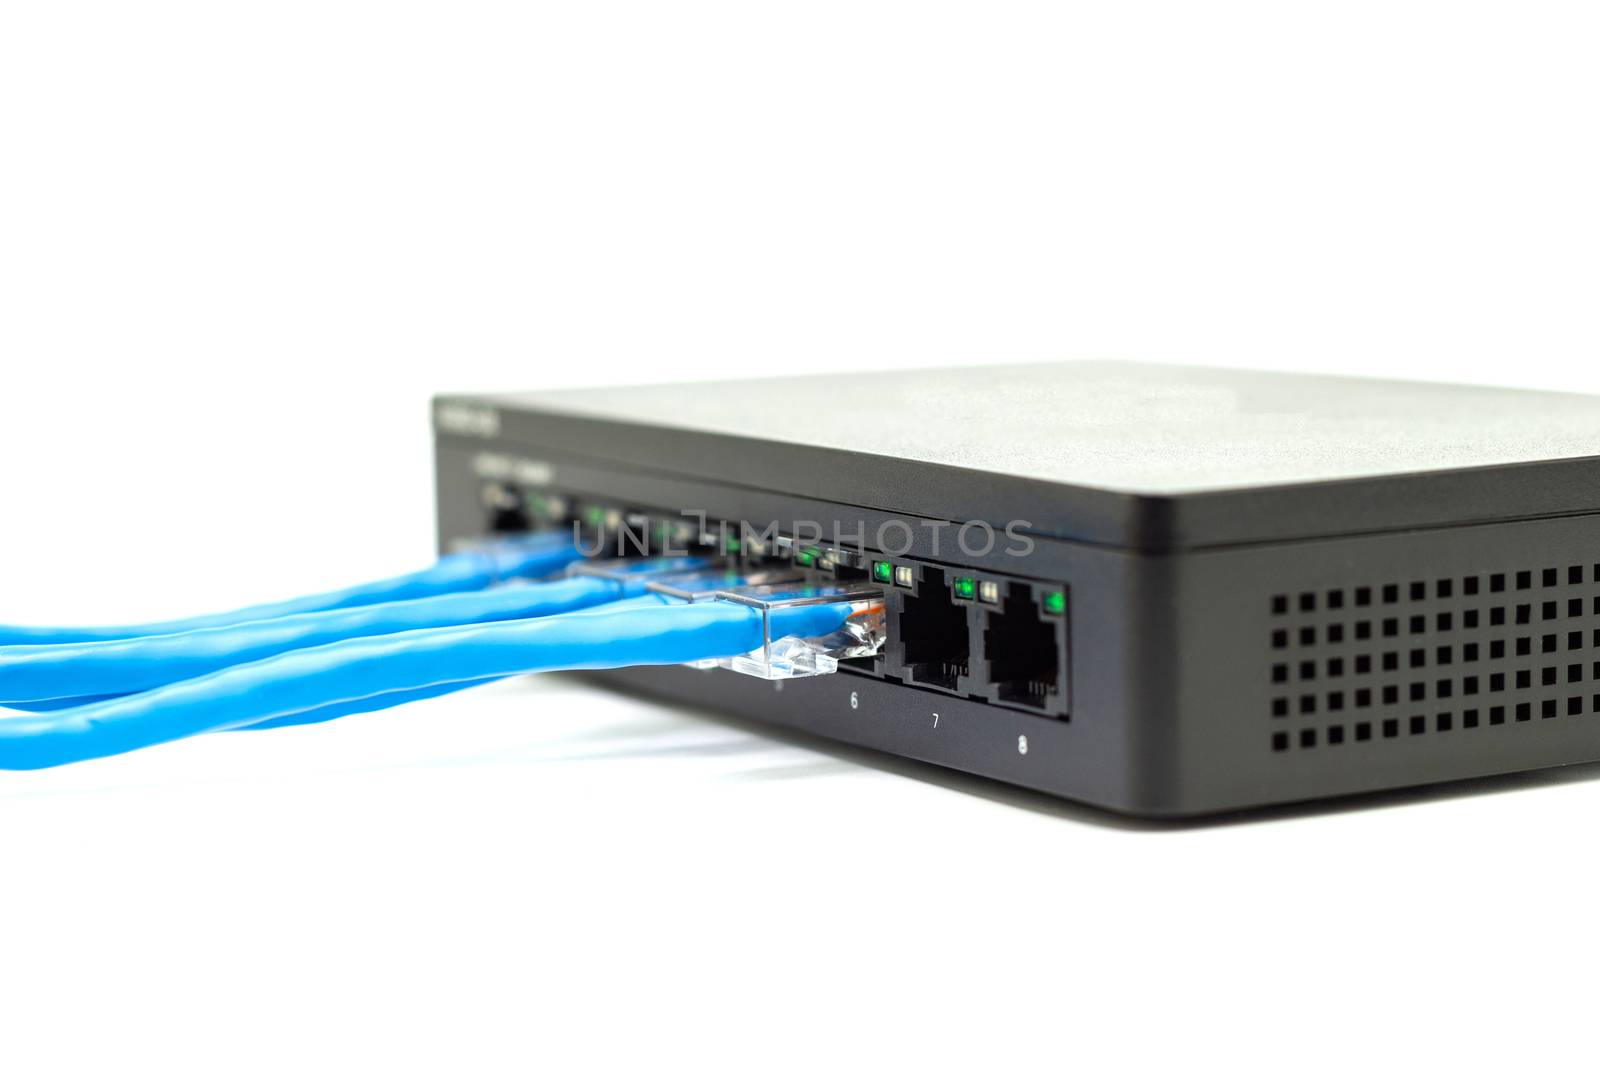 The blue network cables connect port switch on white table concept internet network connection